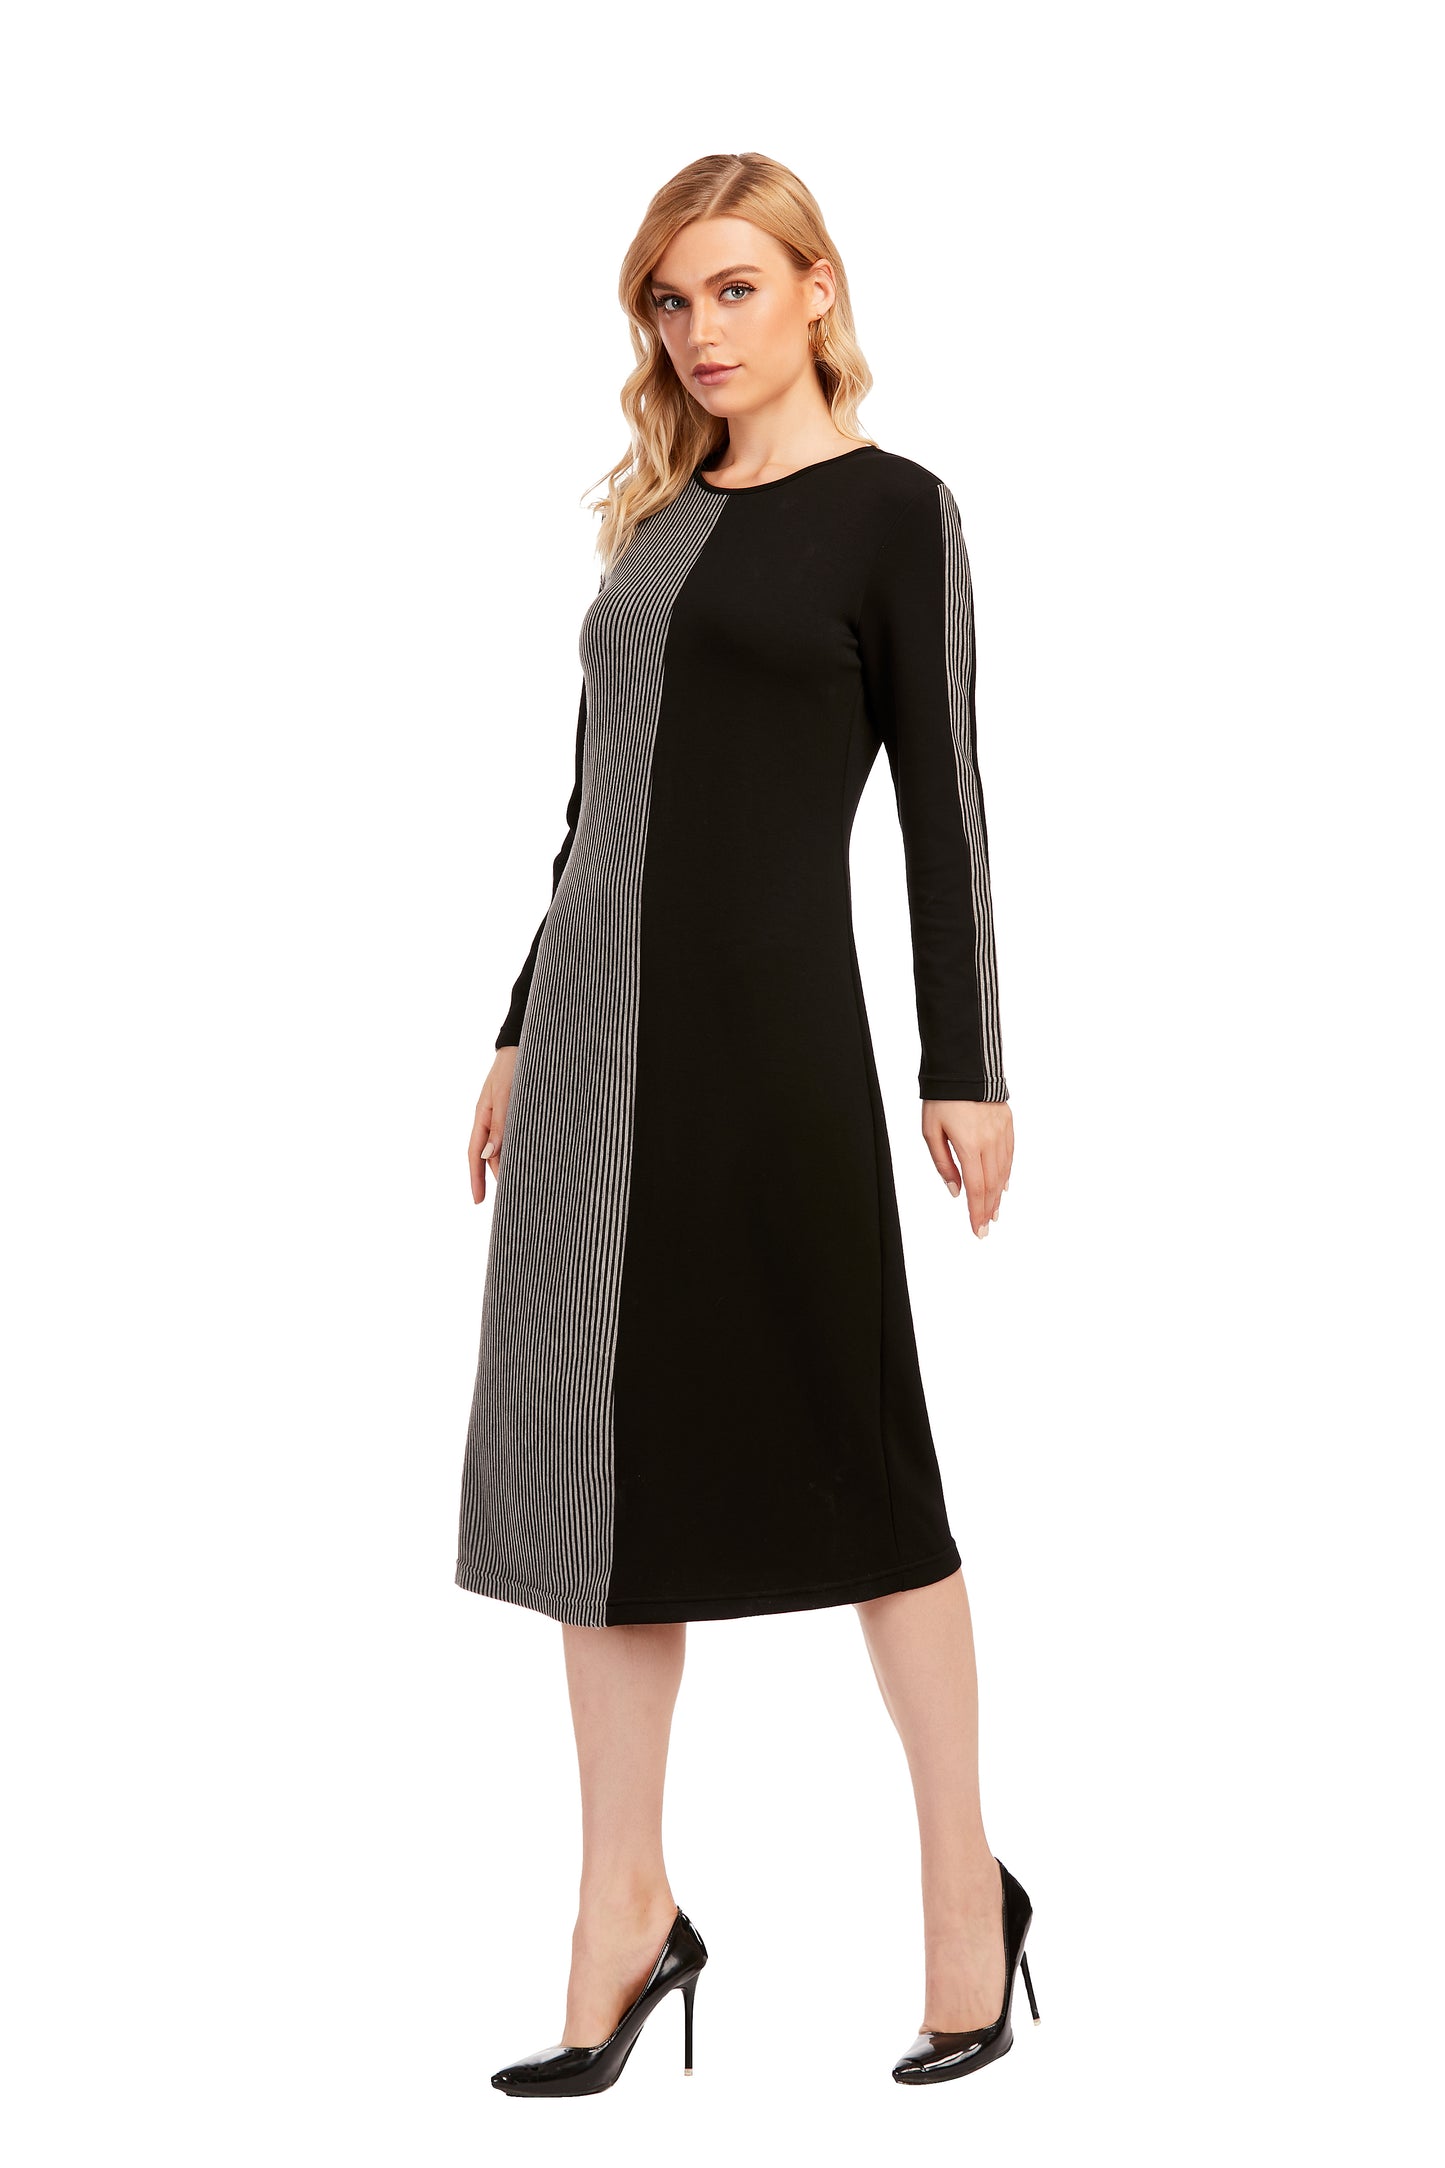 Striped & Solid Modest Knitted Long Sleeve Dress - alamaud